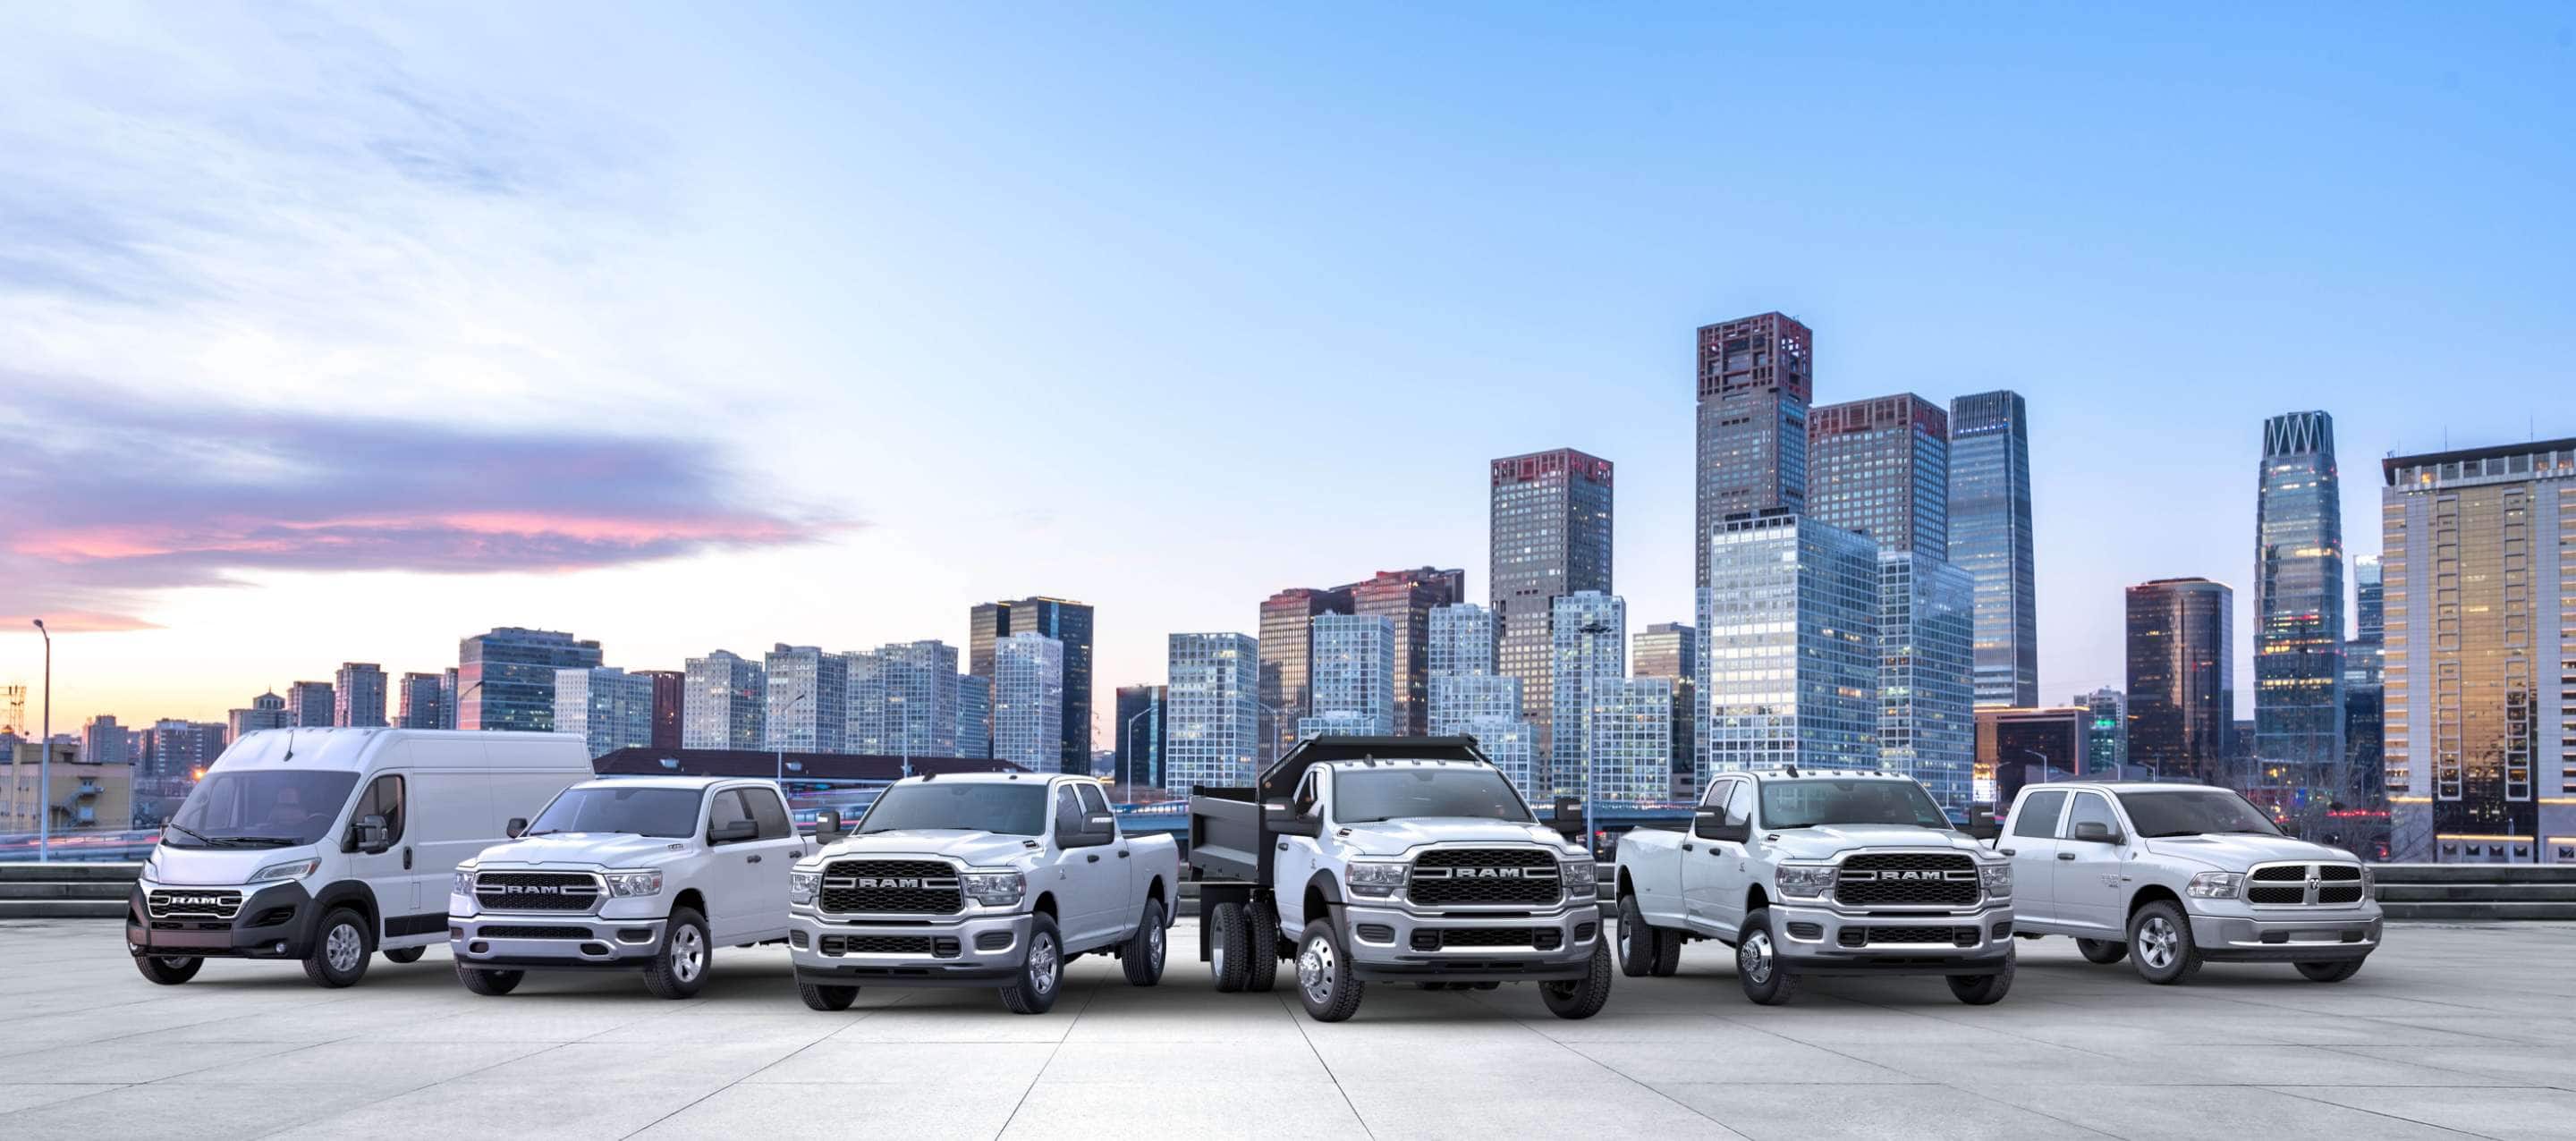 The Ram Brand lineup, all in white, parked side-by-side with a cityscape at dusk in the background. Beginning on the left: a 2023 Ram ProMaster 3500 High Roof Cargo Van, 2022 Ram ProMaster City Cargo Van, 2023 Ram 1500 Tradesman Crew Cab, 2023 Ram 5500 Tradesman Regular Cab with dump body, 2023 Ram 3500 Tradesman Crew Cab and 2023 Ram 1500 Classic Regular Cab. Ram Commercial.